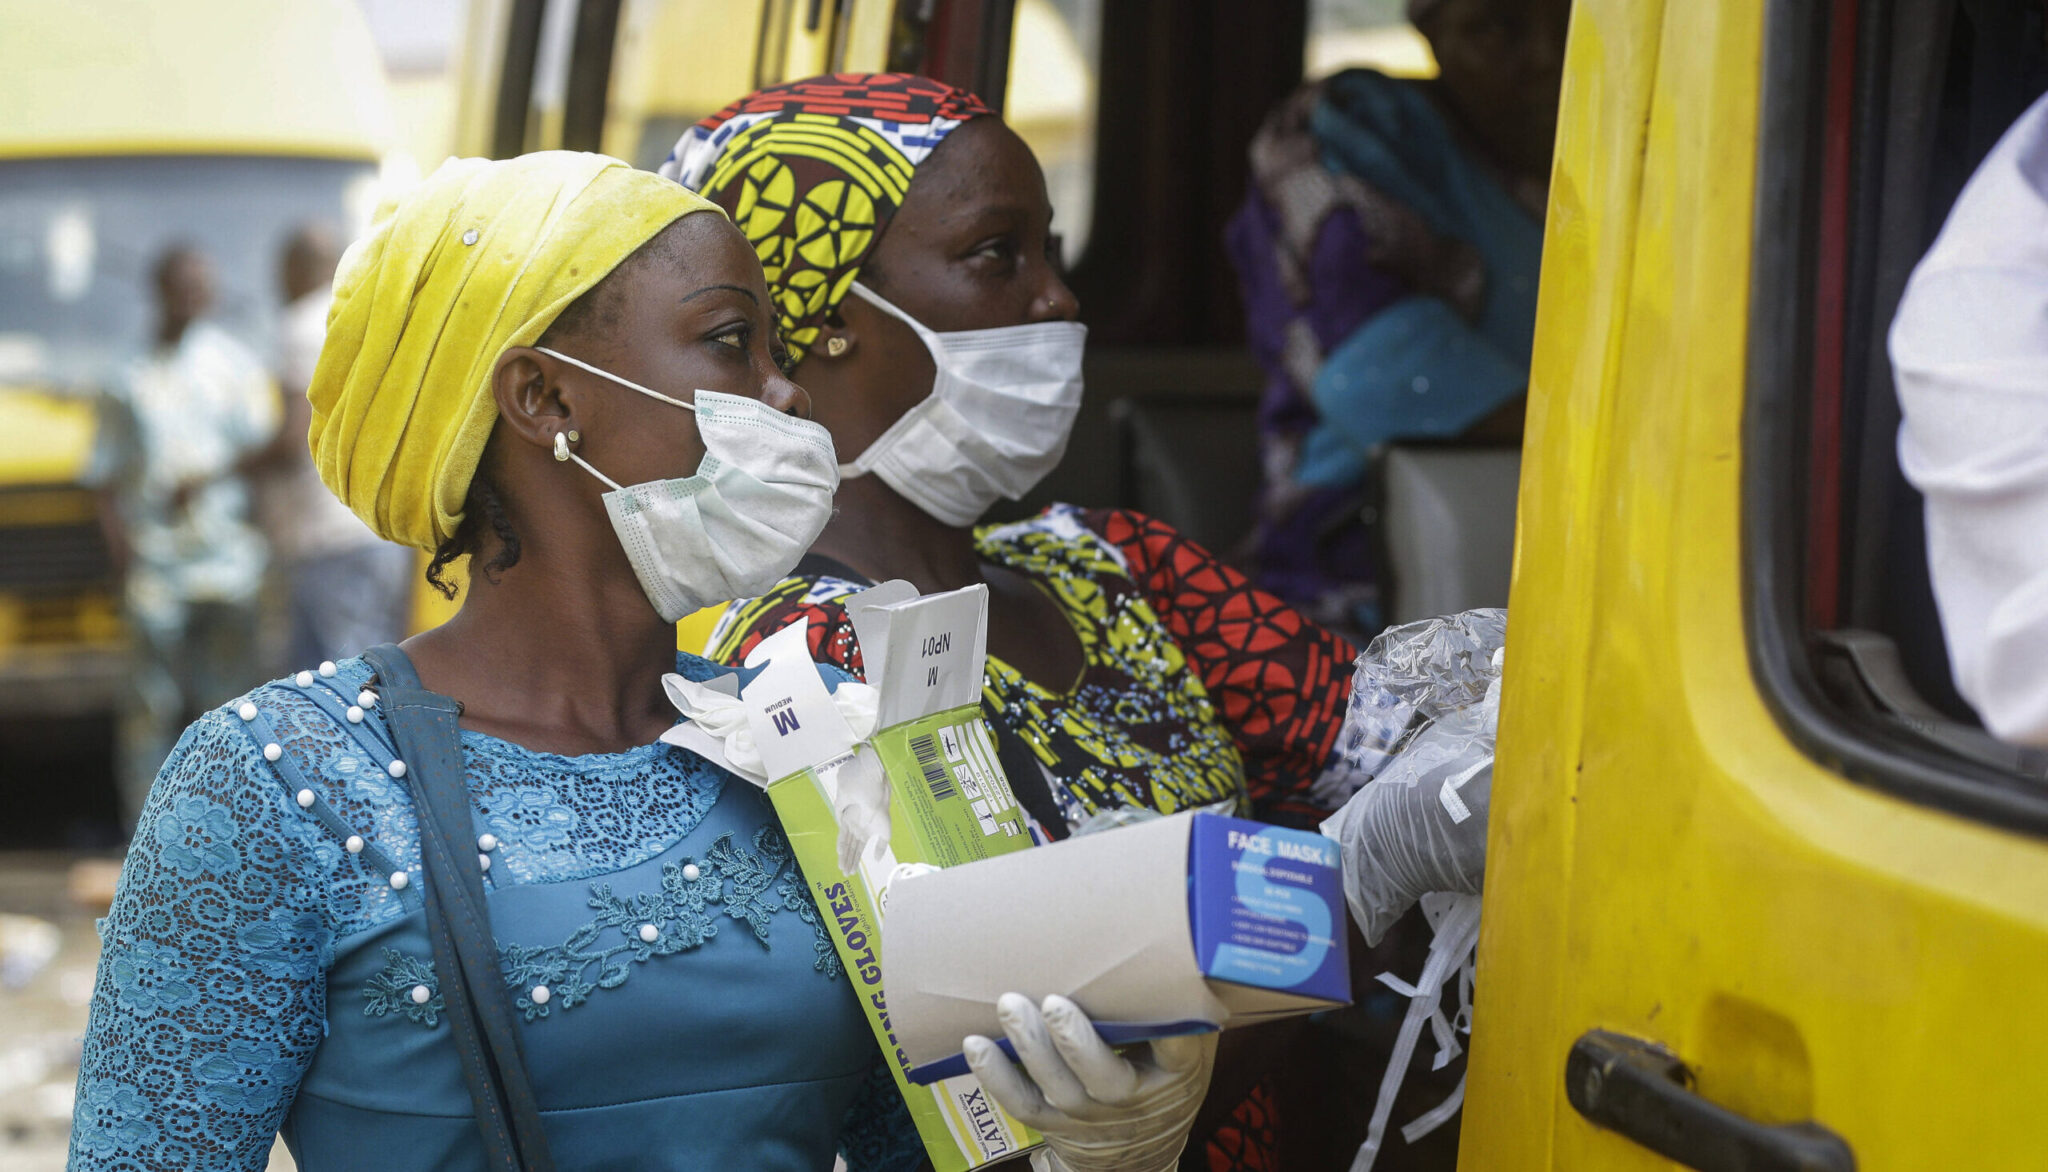 Women sell face masks and gloves, to prevent the spread of the new coronavirus, to passengers at a public minibus station in Lagos, Nigeria Friday, March 27, 2020. The new coronavirus causes mild or moderate symptoms for most people, but for some, especially older adults and people with existing health problems, it can cause more severe illness or death. (AP Photo/Sunday Alamba)